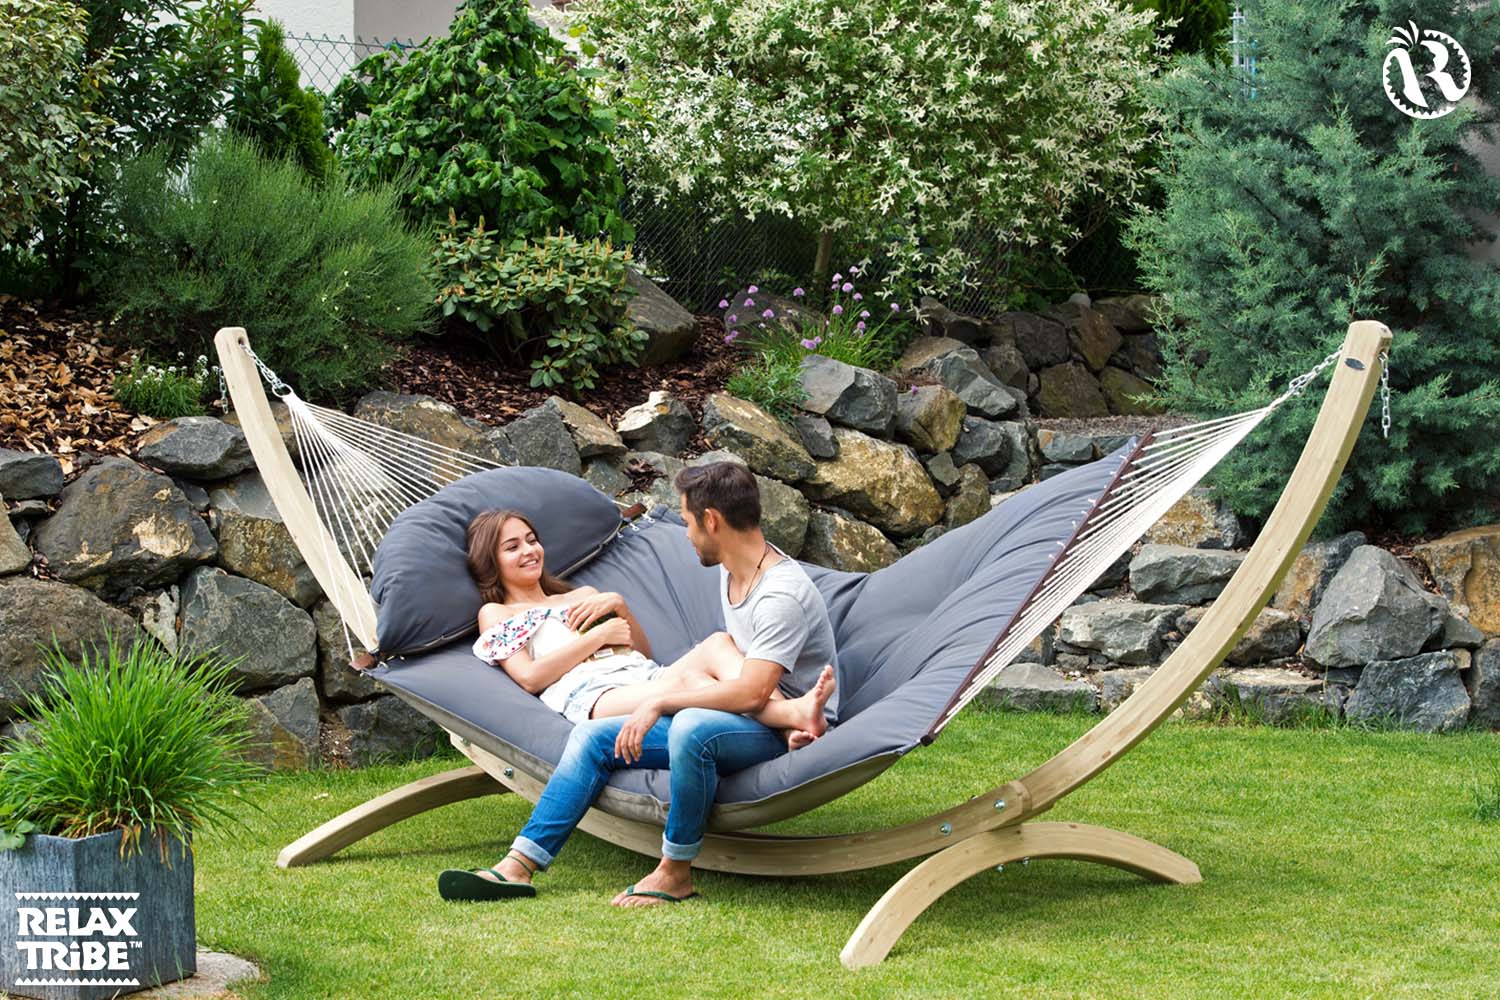 fat-hammock-taupe-double-xxl-weatherproof-padded-hammock-with-bars-pillow-taupe-grey-garden-wood-stand